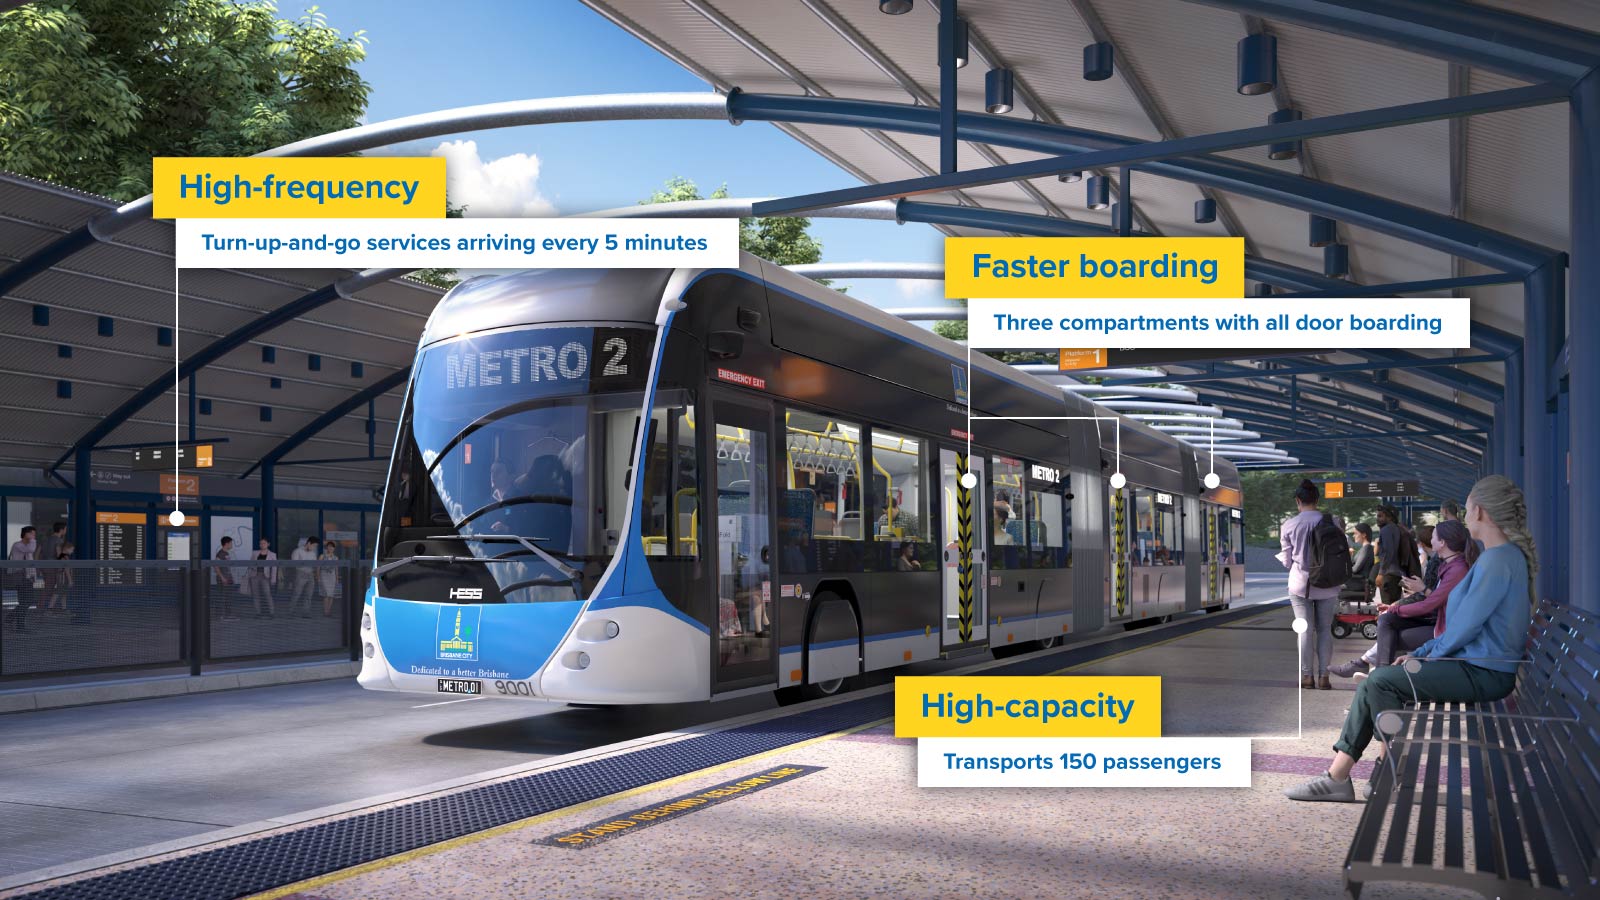 Image of Brisbane Metro bus with text overlays: Faster boarding, High-capacity, High-frequency